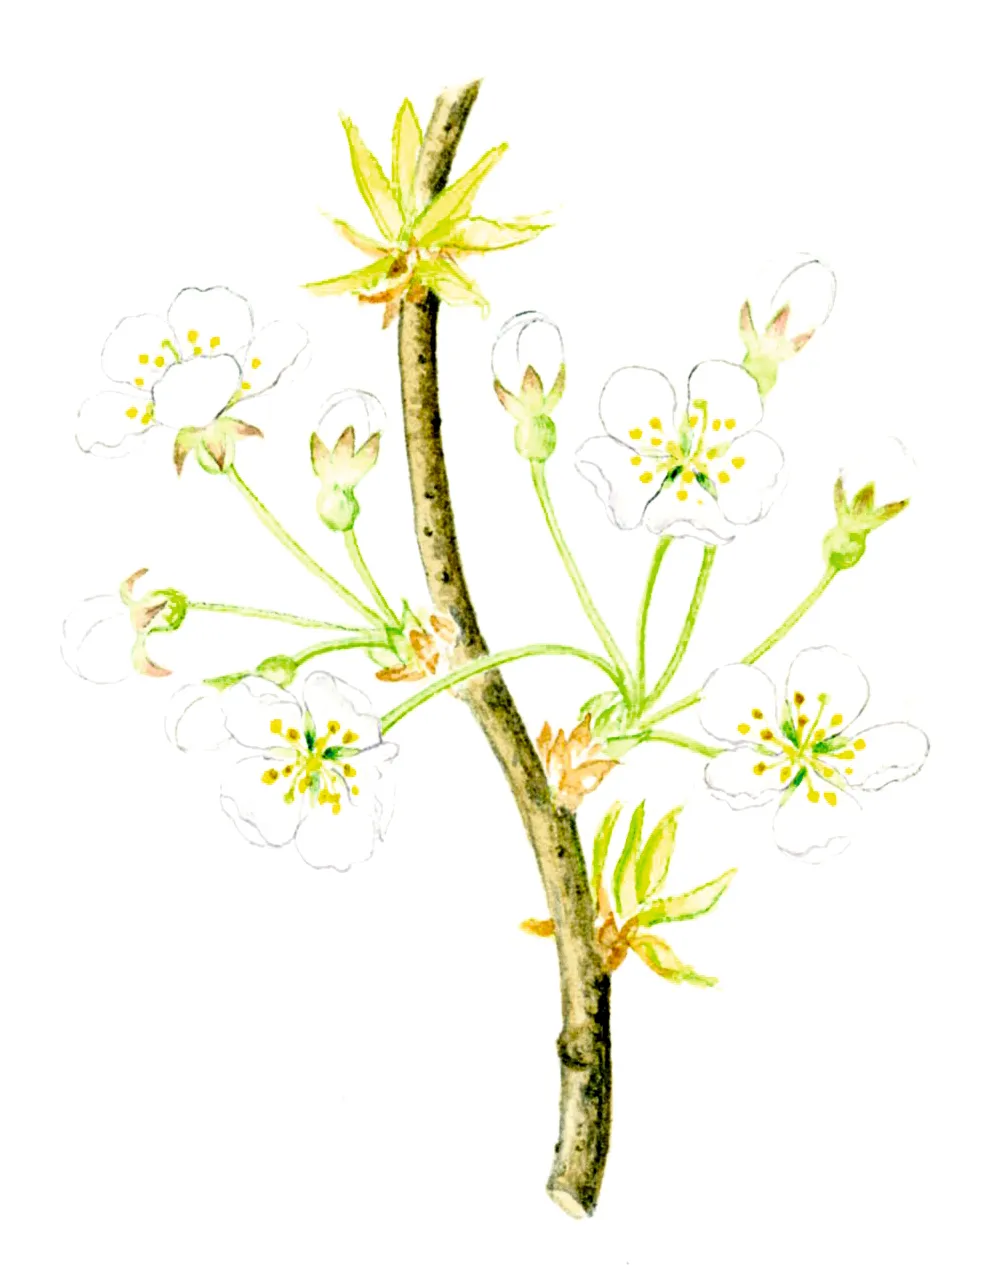 Illustration of wild cherry blossom and leaves.